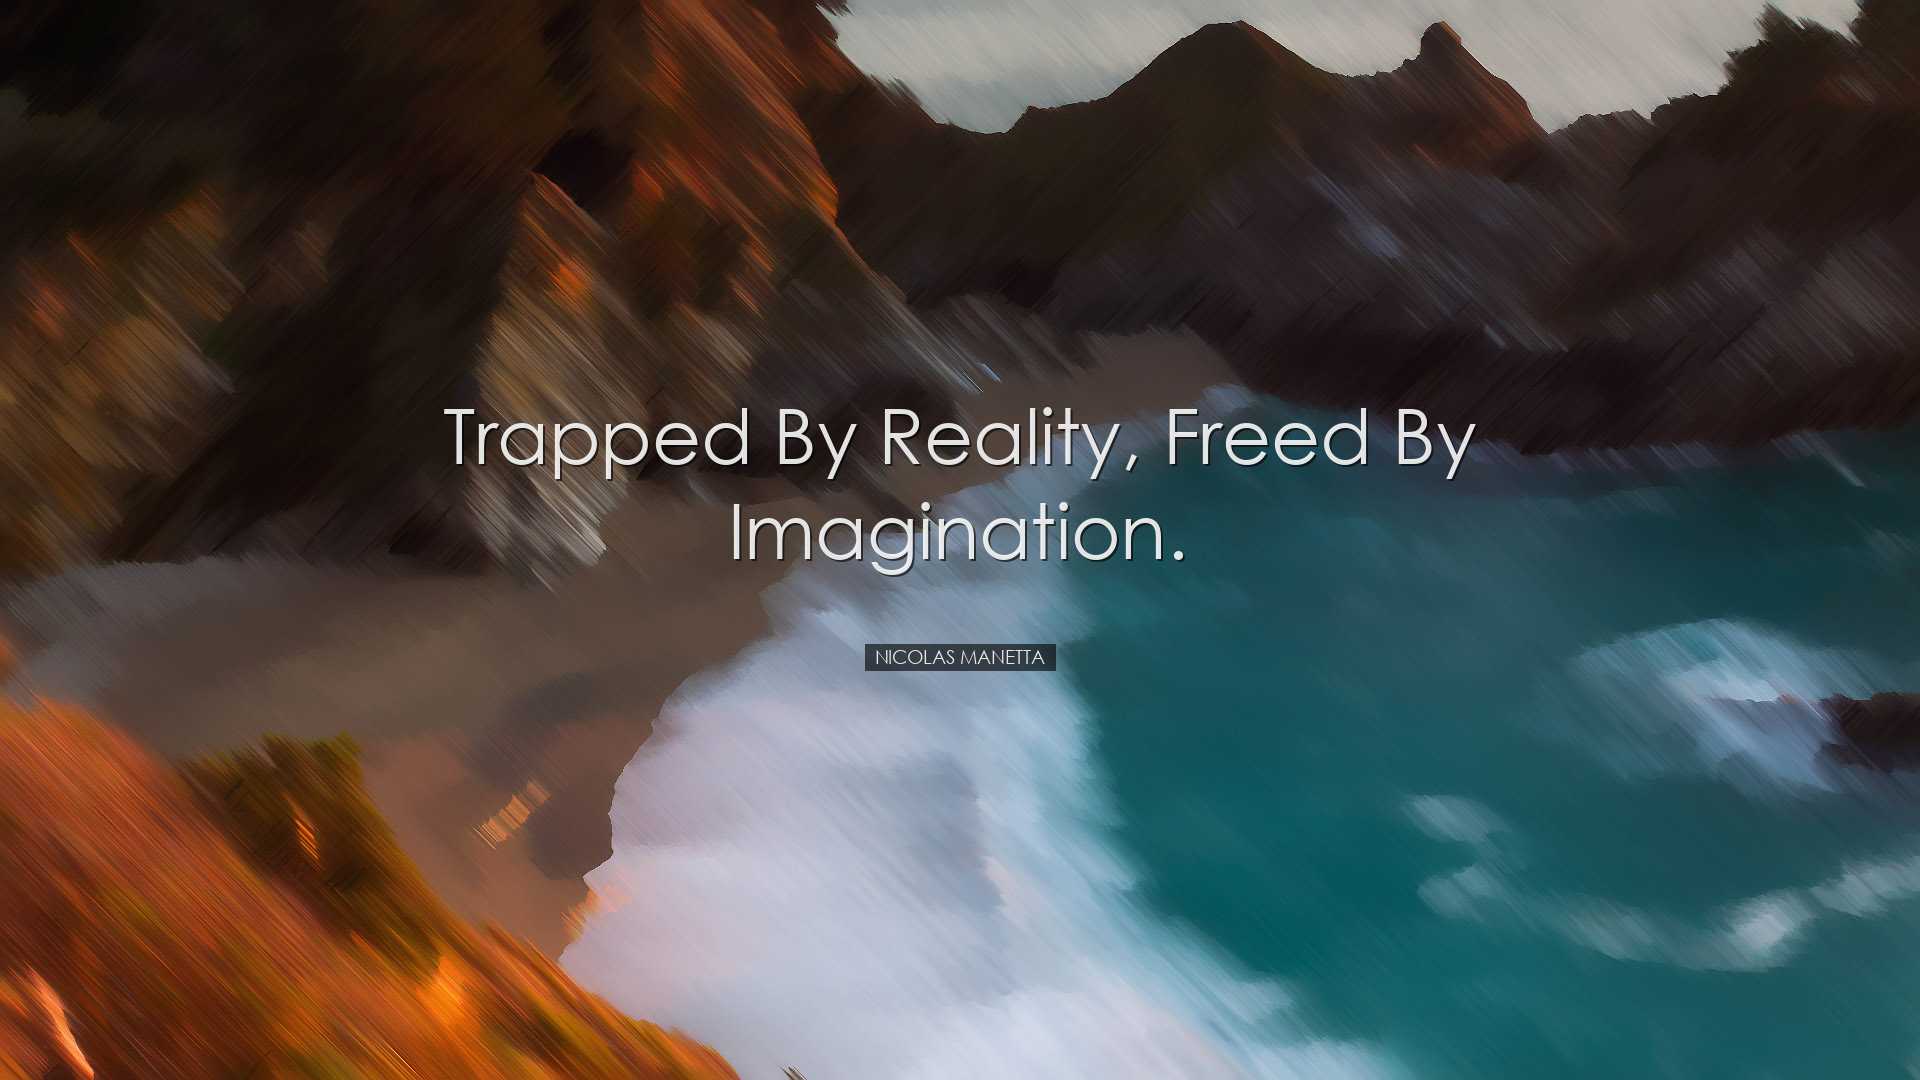 Trapped by reality, freed by imagination. - Nicolas Manetta